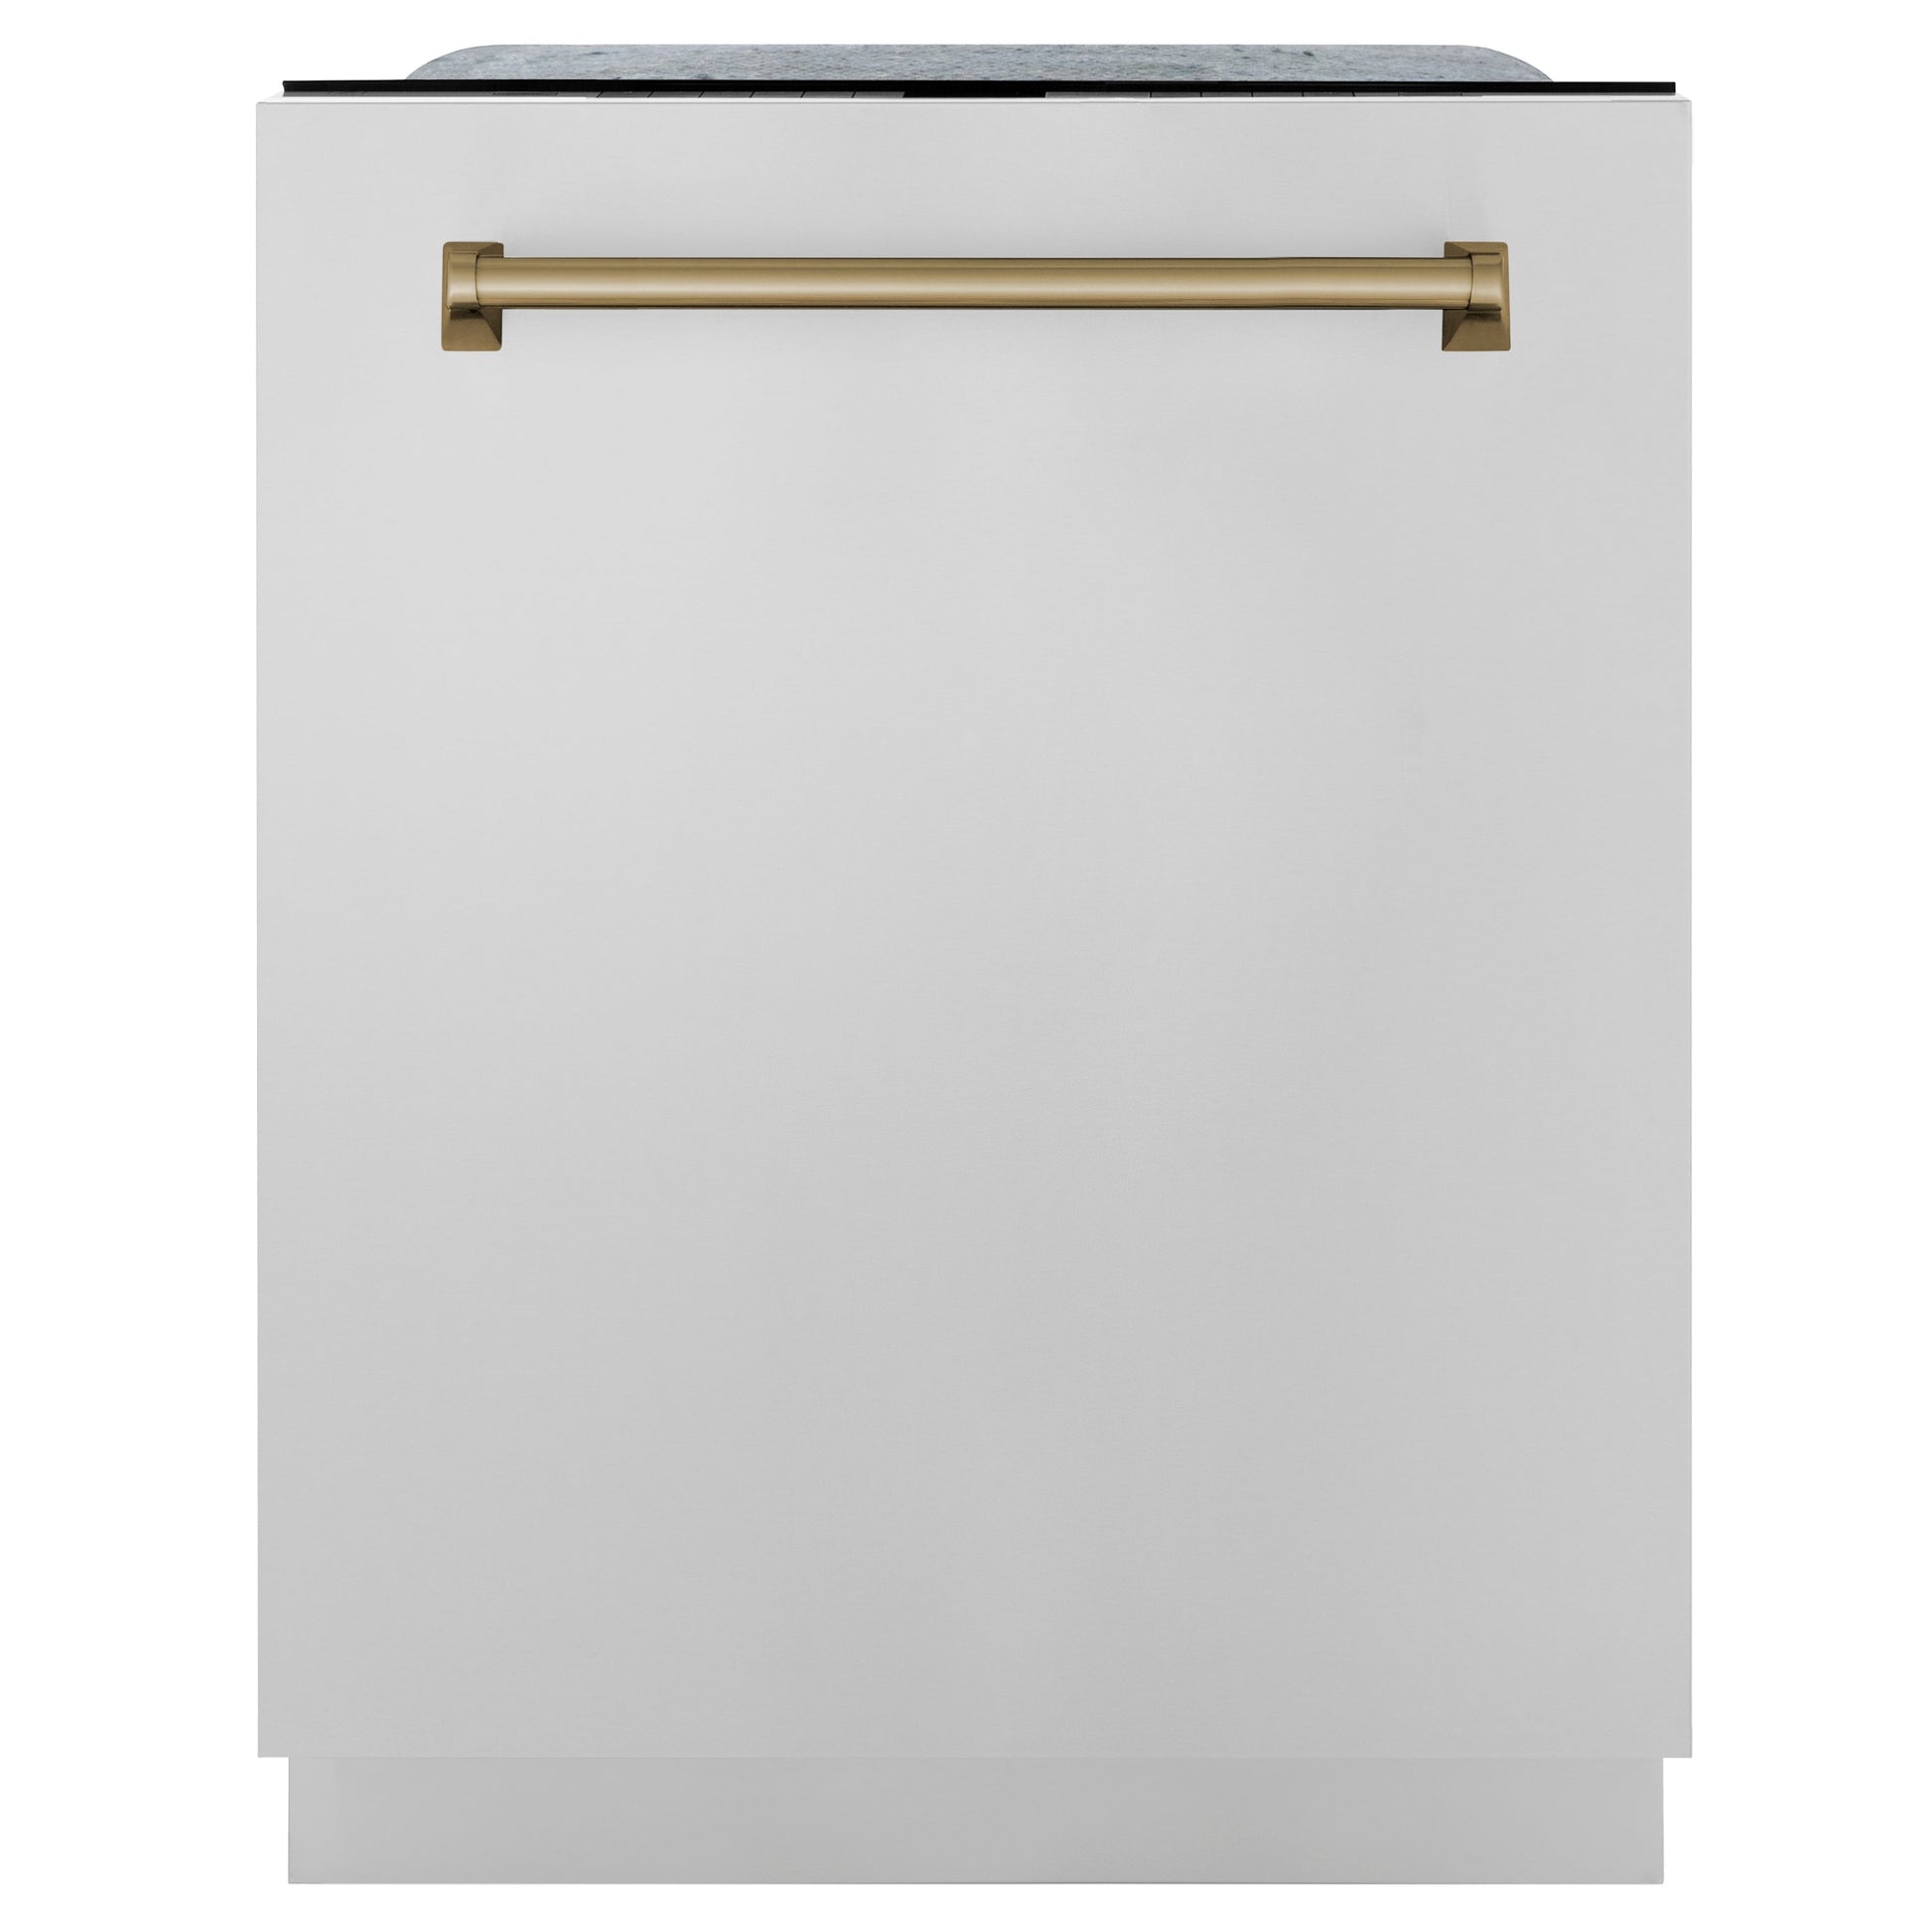 ZLINE 48" Autograph Edition 4 Appliance Package with Stainless Steel Dual Fuel Range, Range Hood, Dishwasher, and Refrigeration - Champagne Bronze Accents